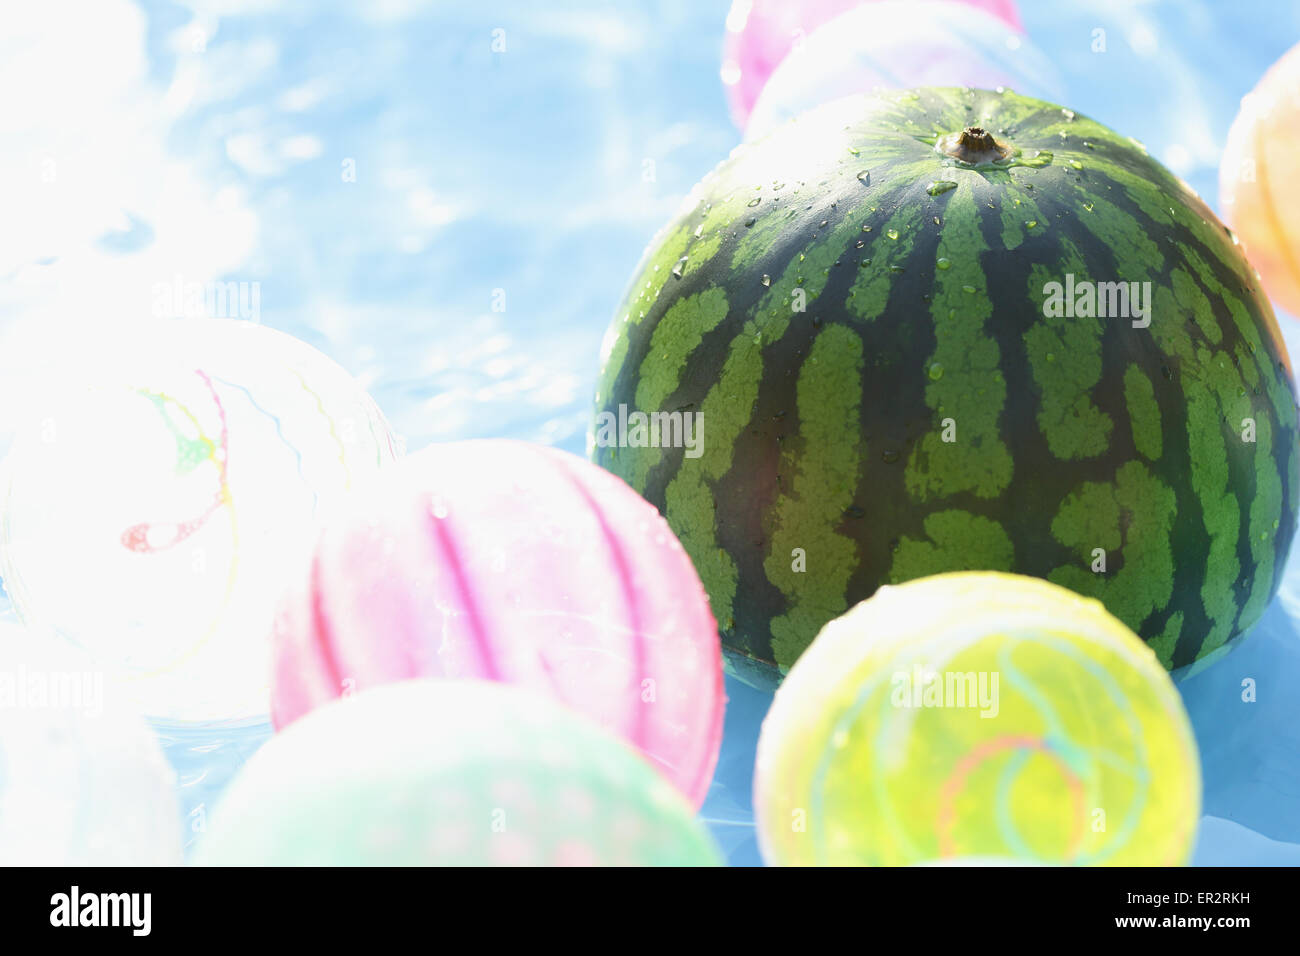 Watermelon in the water Stock Photo